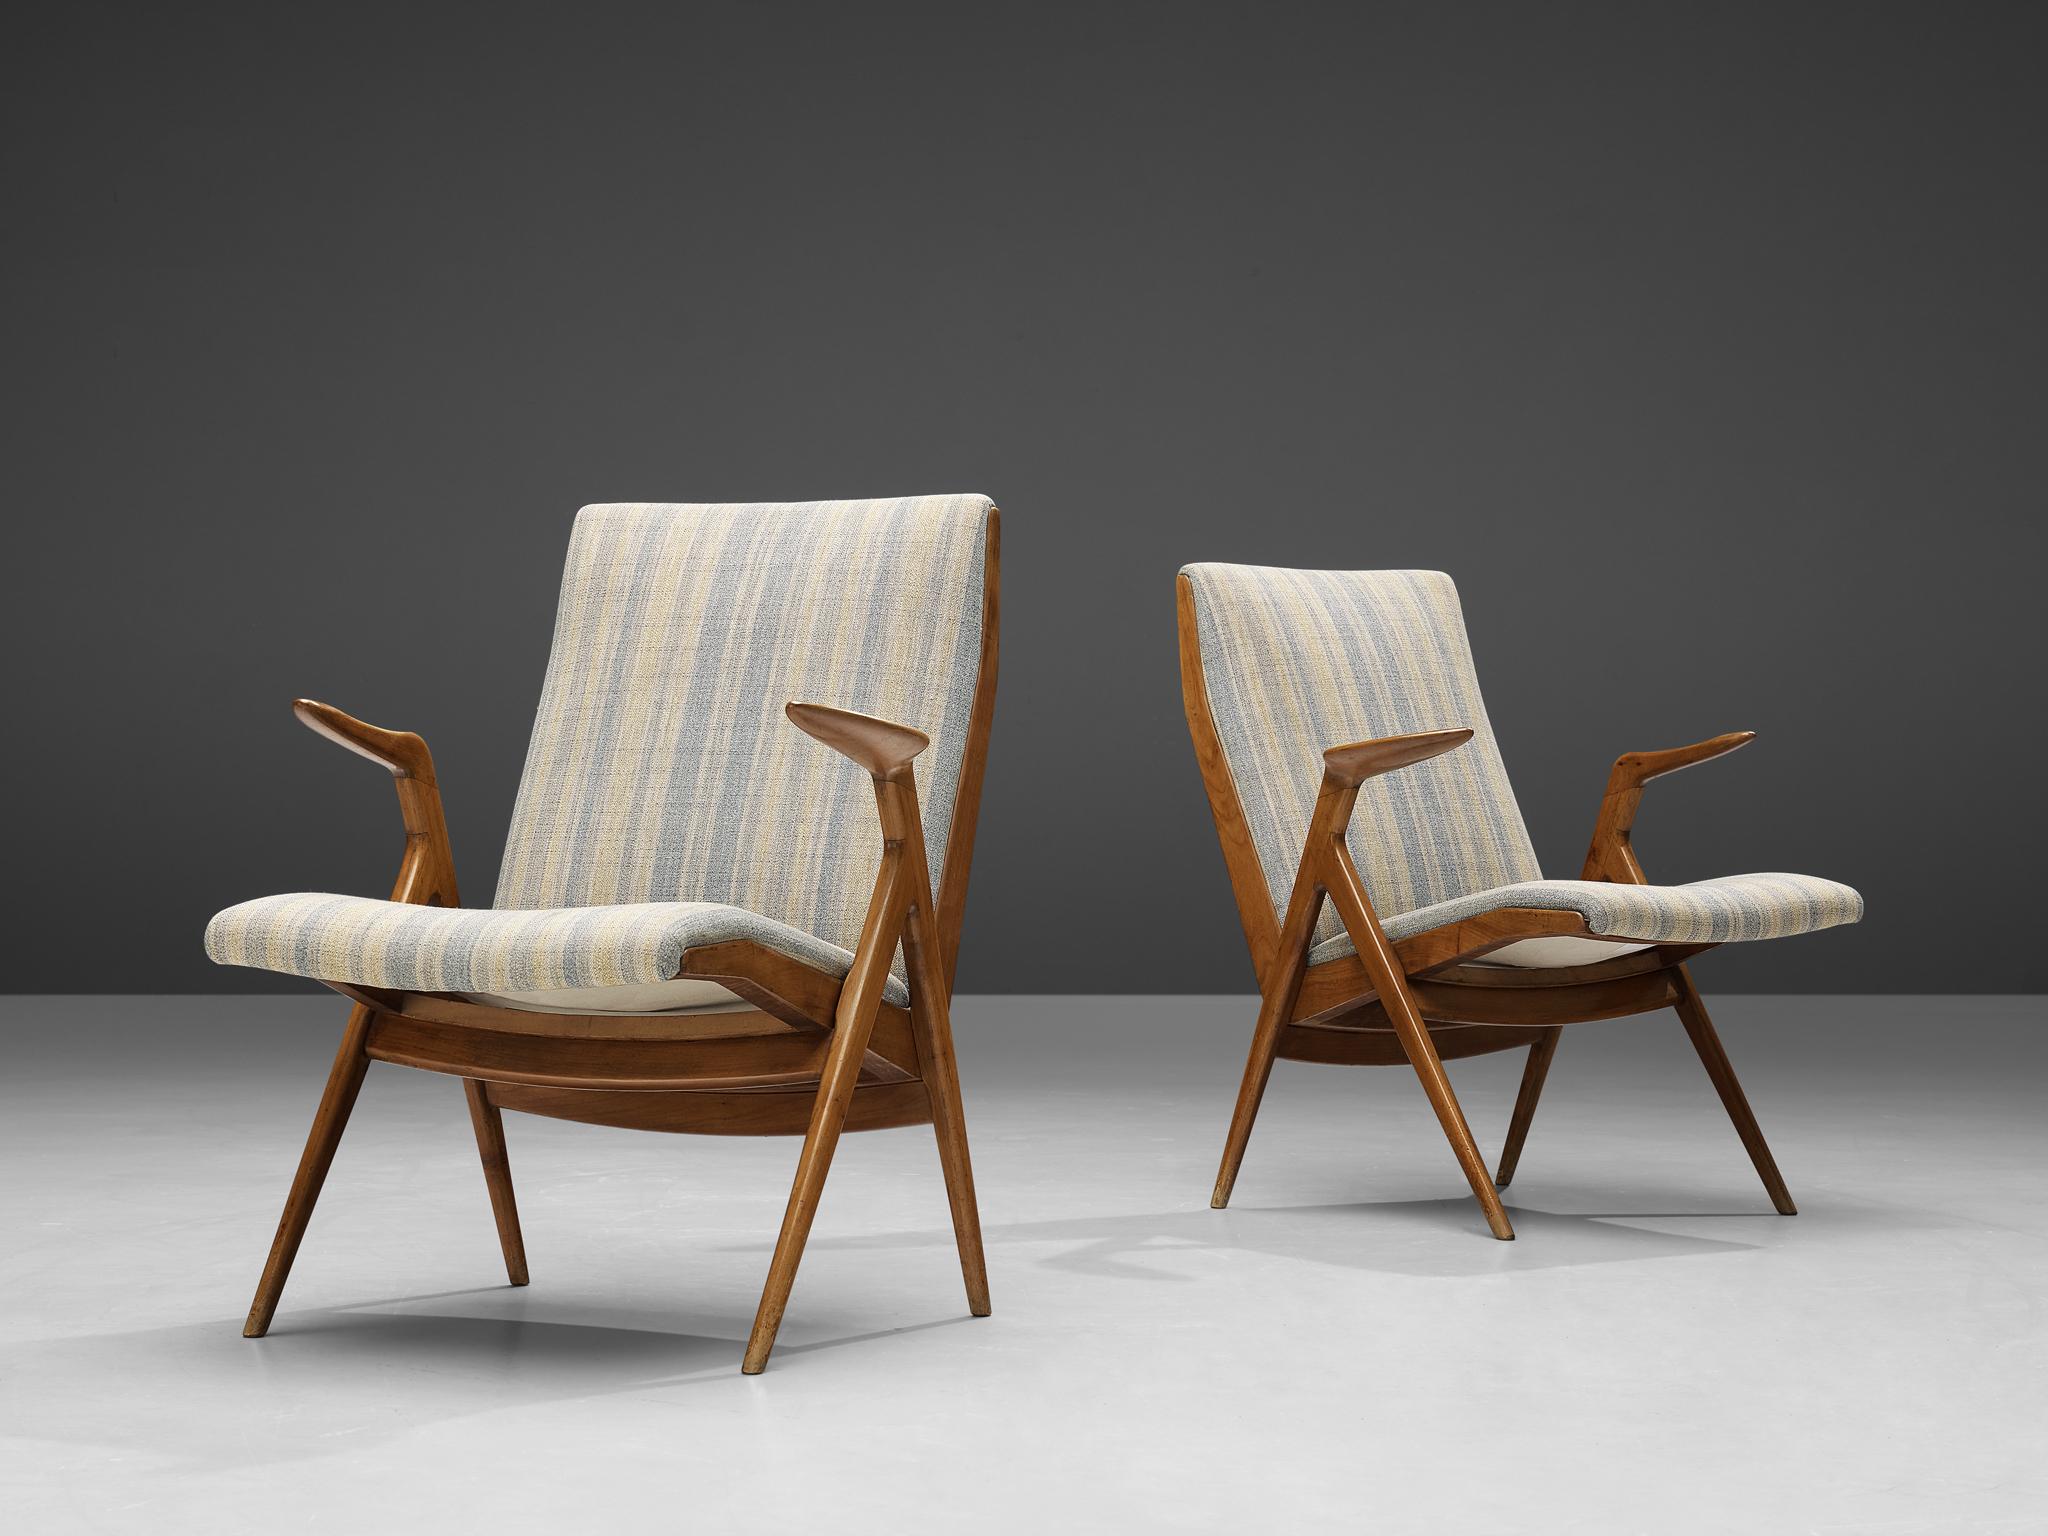 Taichiro Nakay for La Permanente Mobili, lounge chairs, cherry wood, fabric, Italy, 1955 

Taichiro Nakay is an incredibly talented Japanese designer who is mostly known for his participation at the Selettiva del Mobili competition in Cantù. During